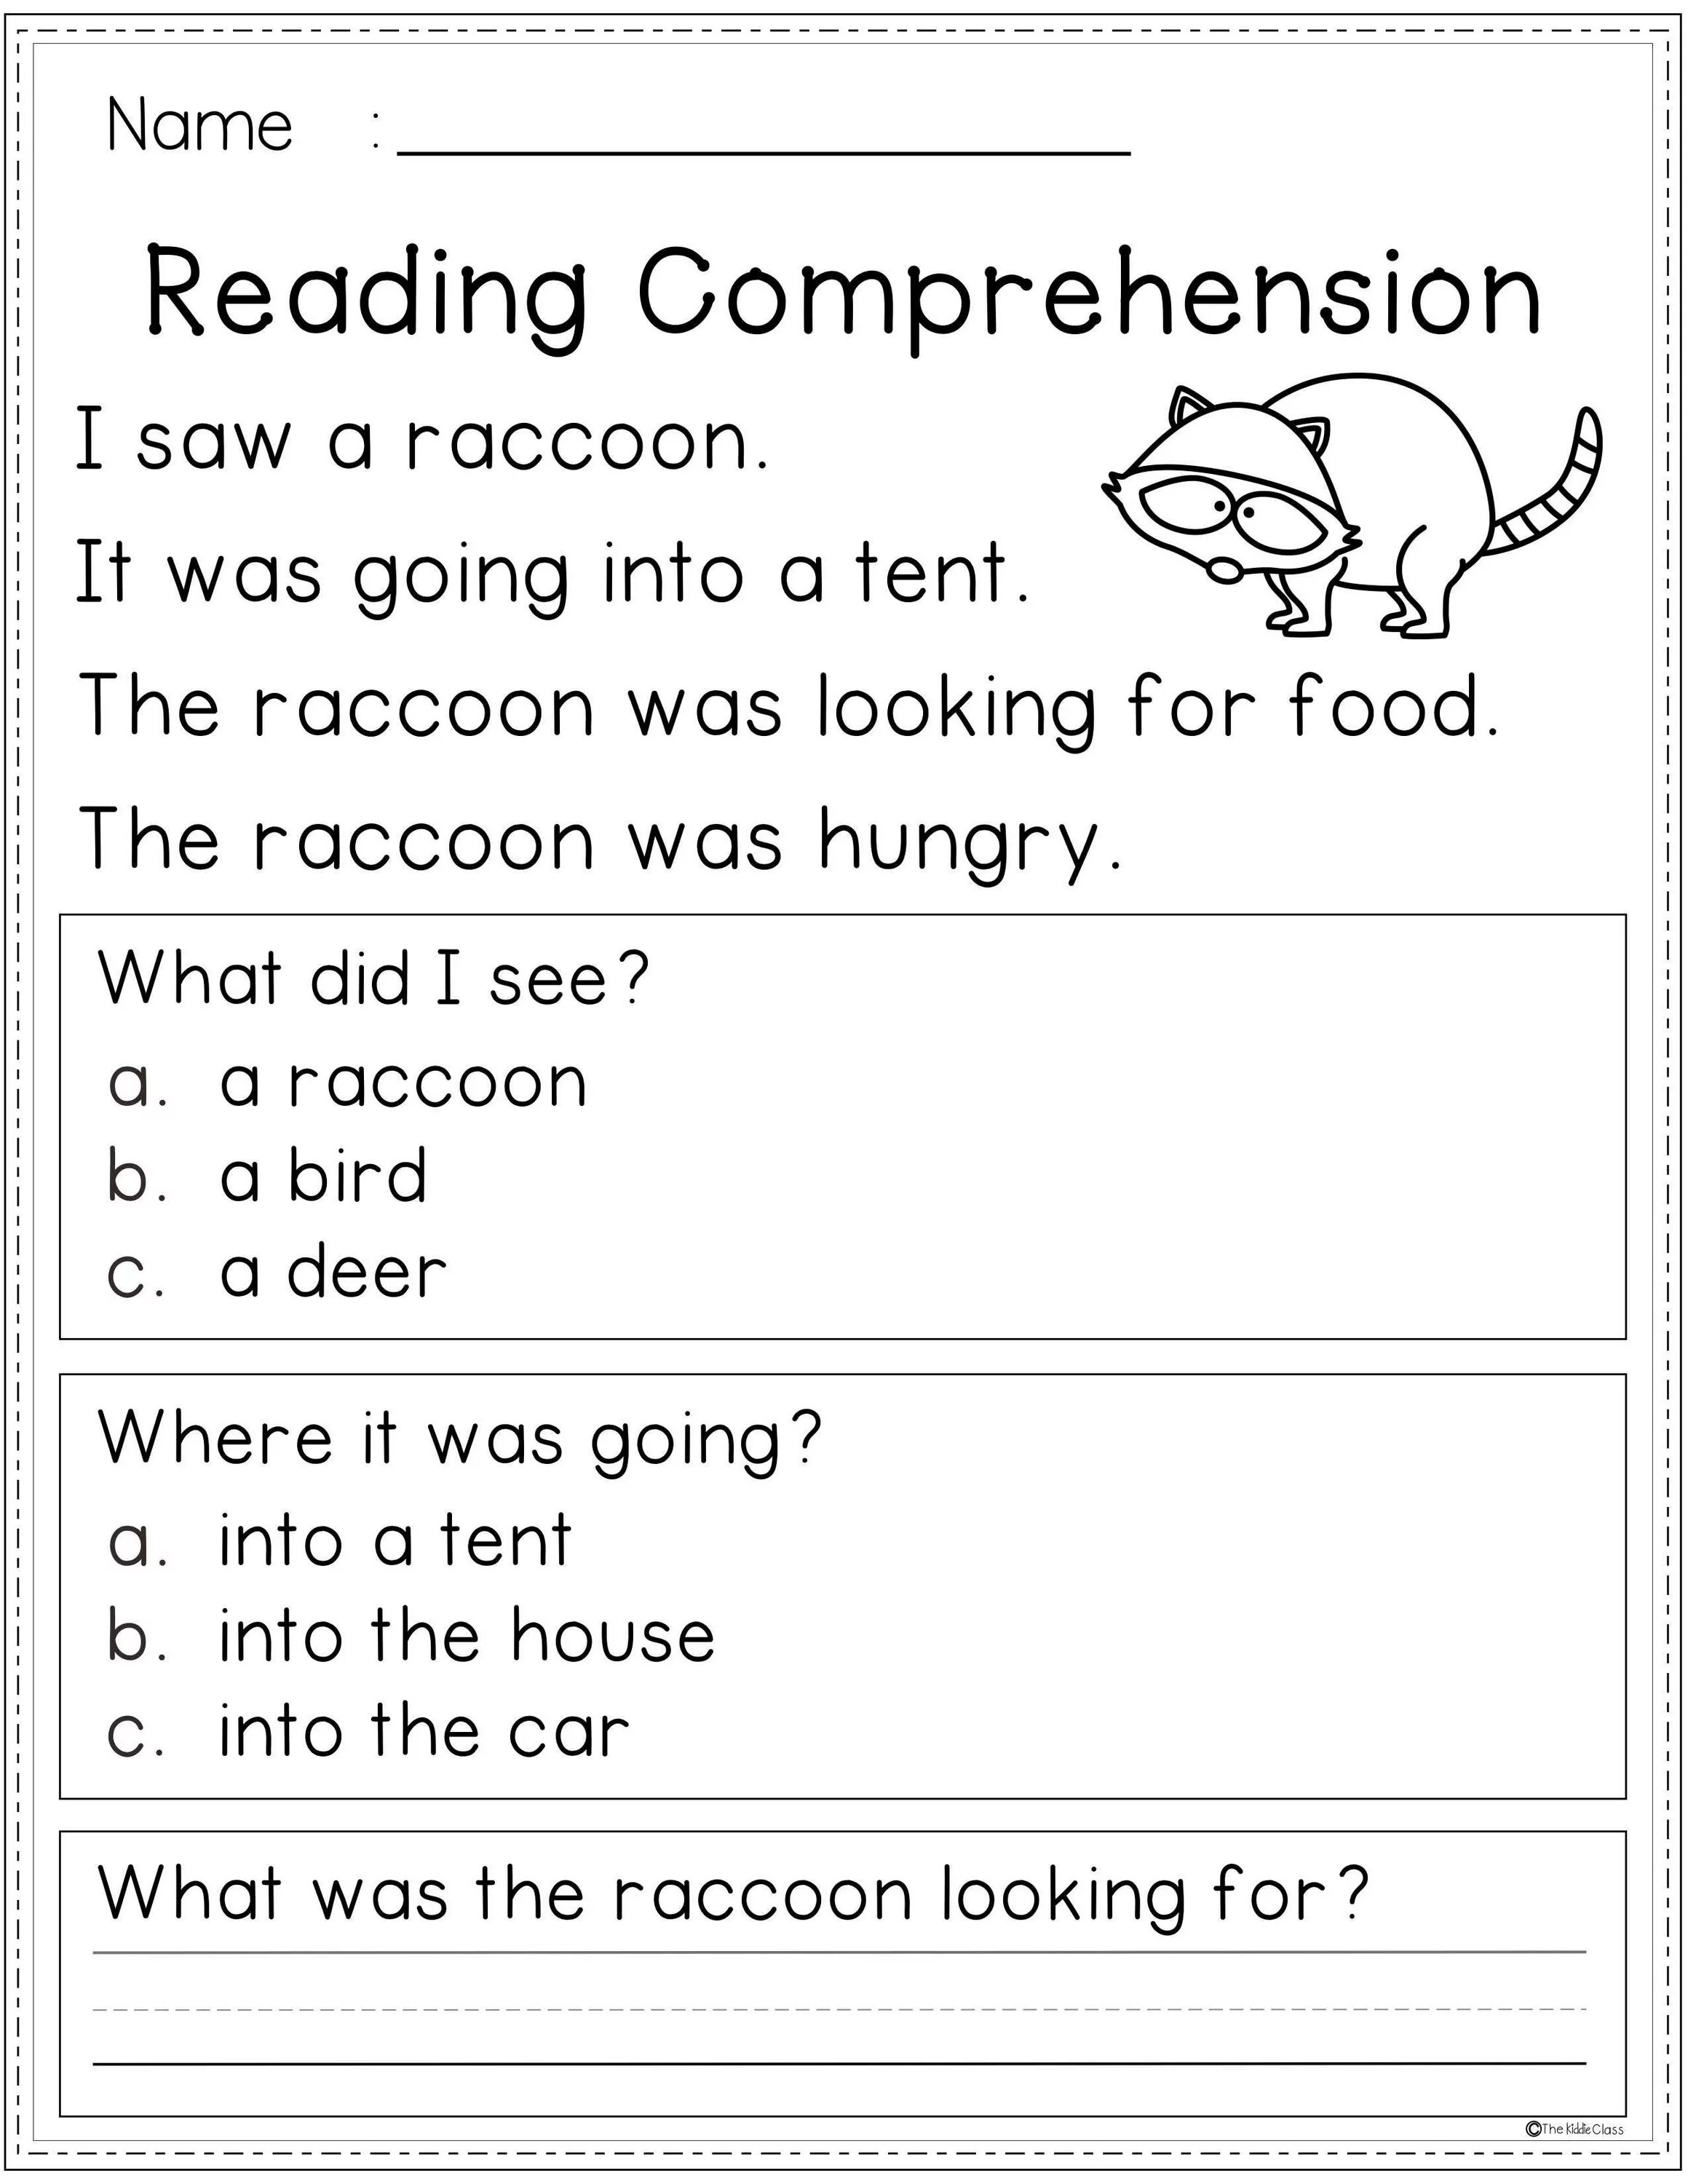 Reading Comprehension. Worksheets чтение. Reading exercises for Elementary английский. English reading Comprehension.